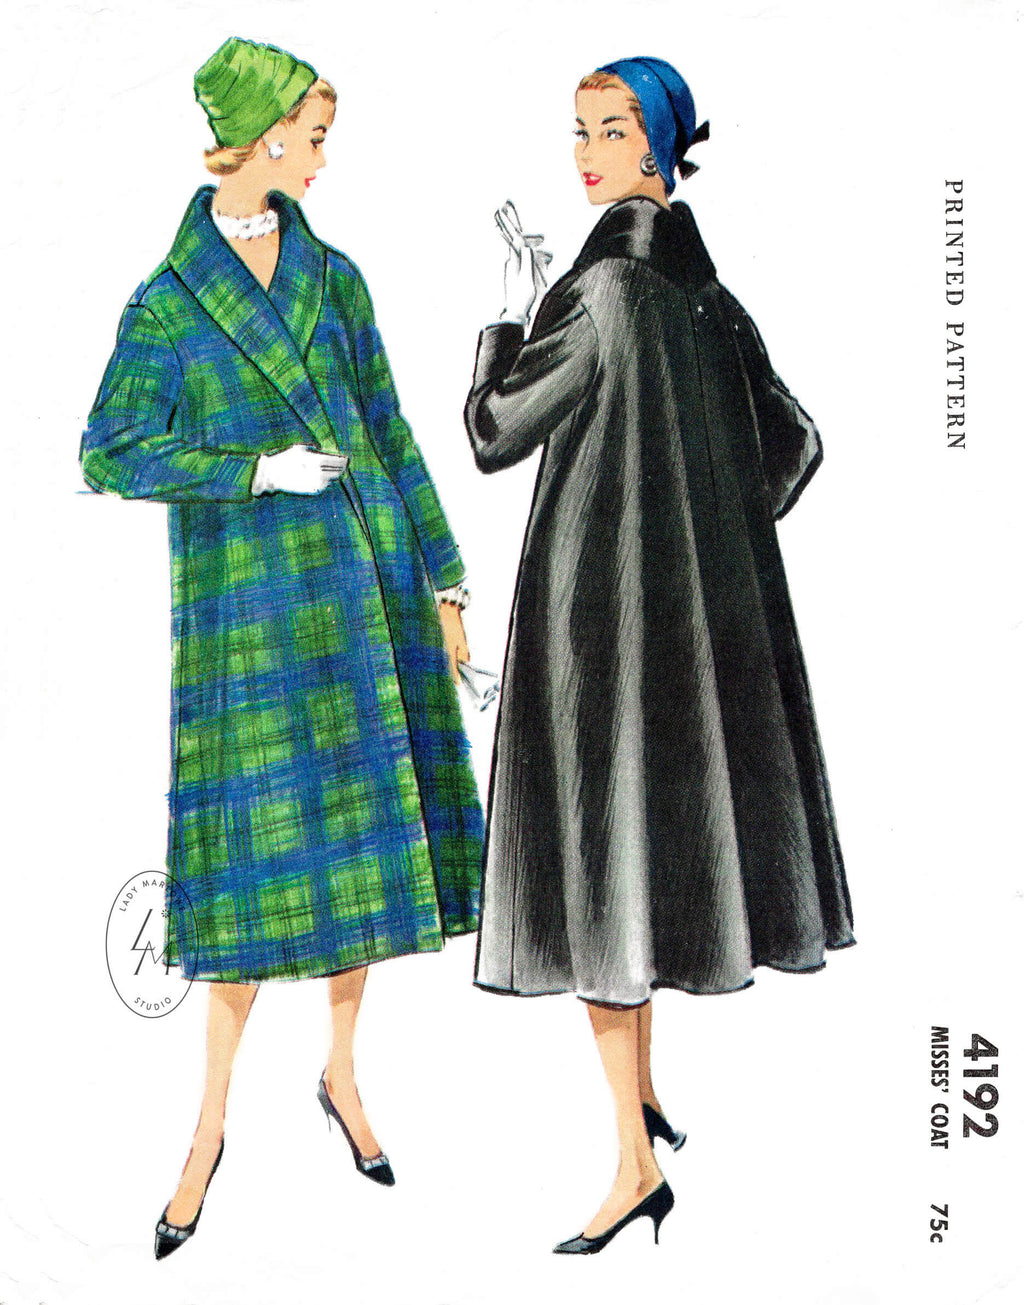 McCall's 4192 1950s swing coat with shawl collar vintage sewing pattern reproduction